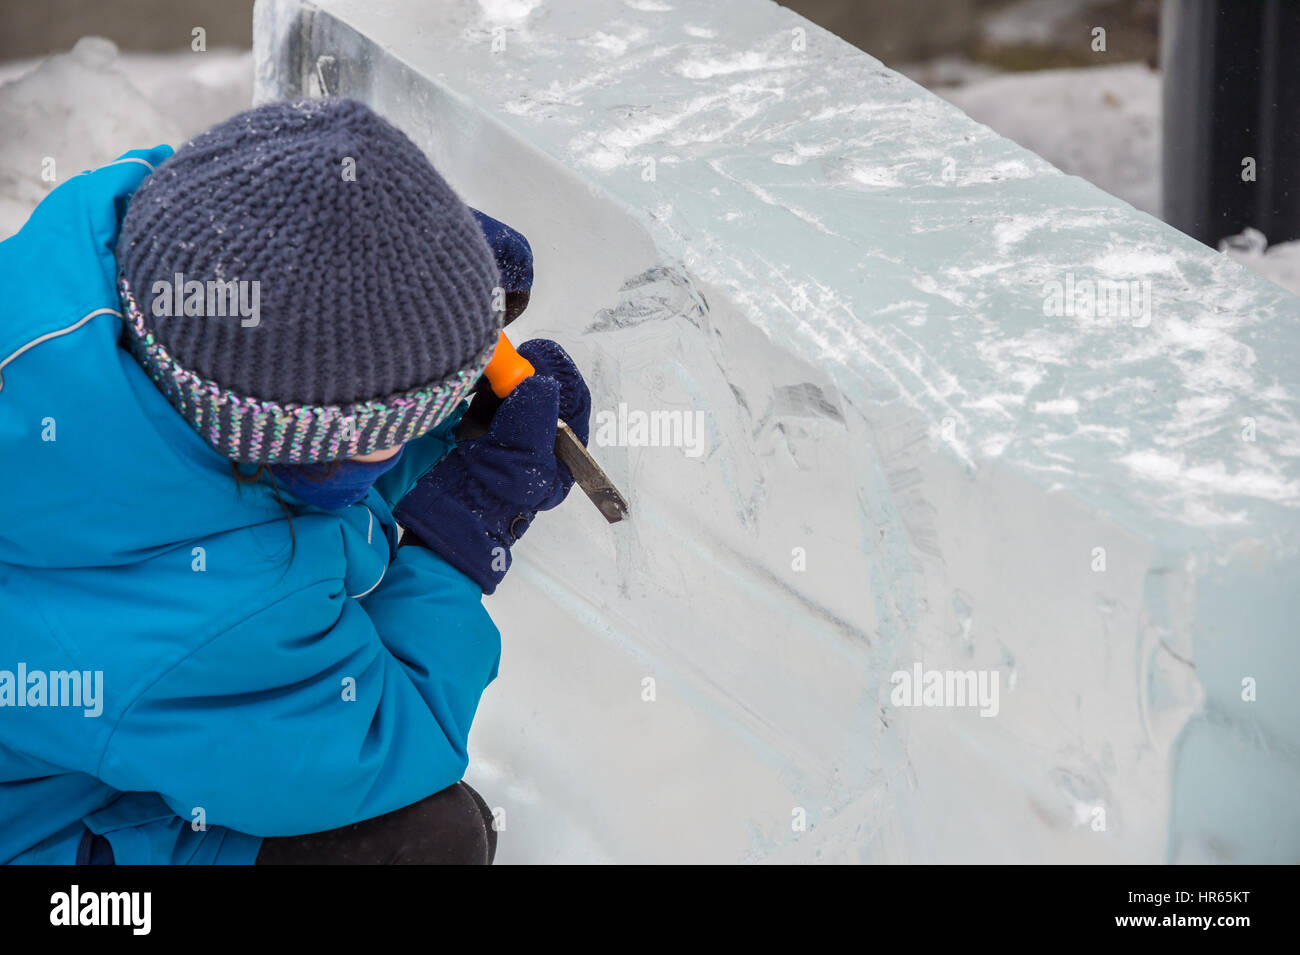 Montreal, CA - 4 February 2017: a child is carving a block of ice during Frima 'Fête des glaces' on Saint-Denis street. Stock Photo